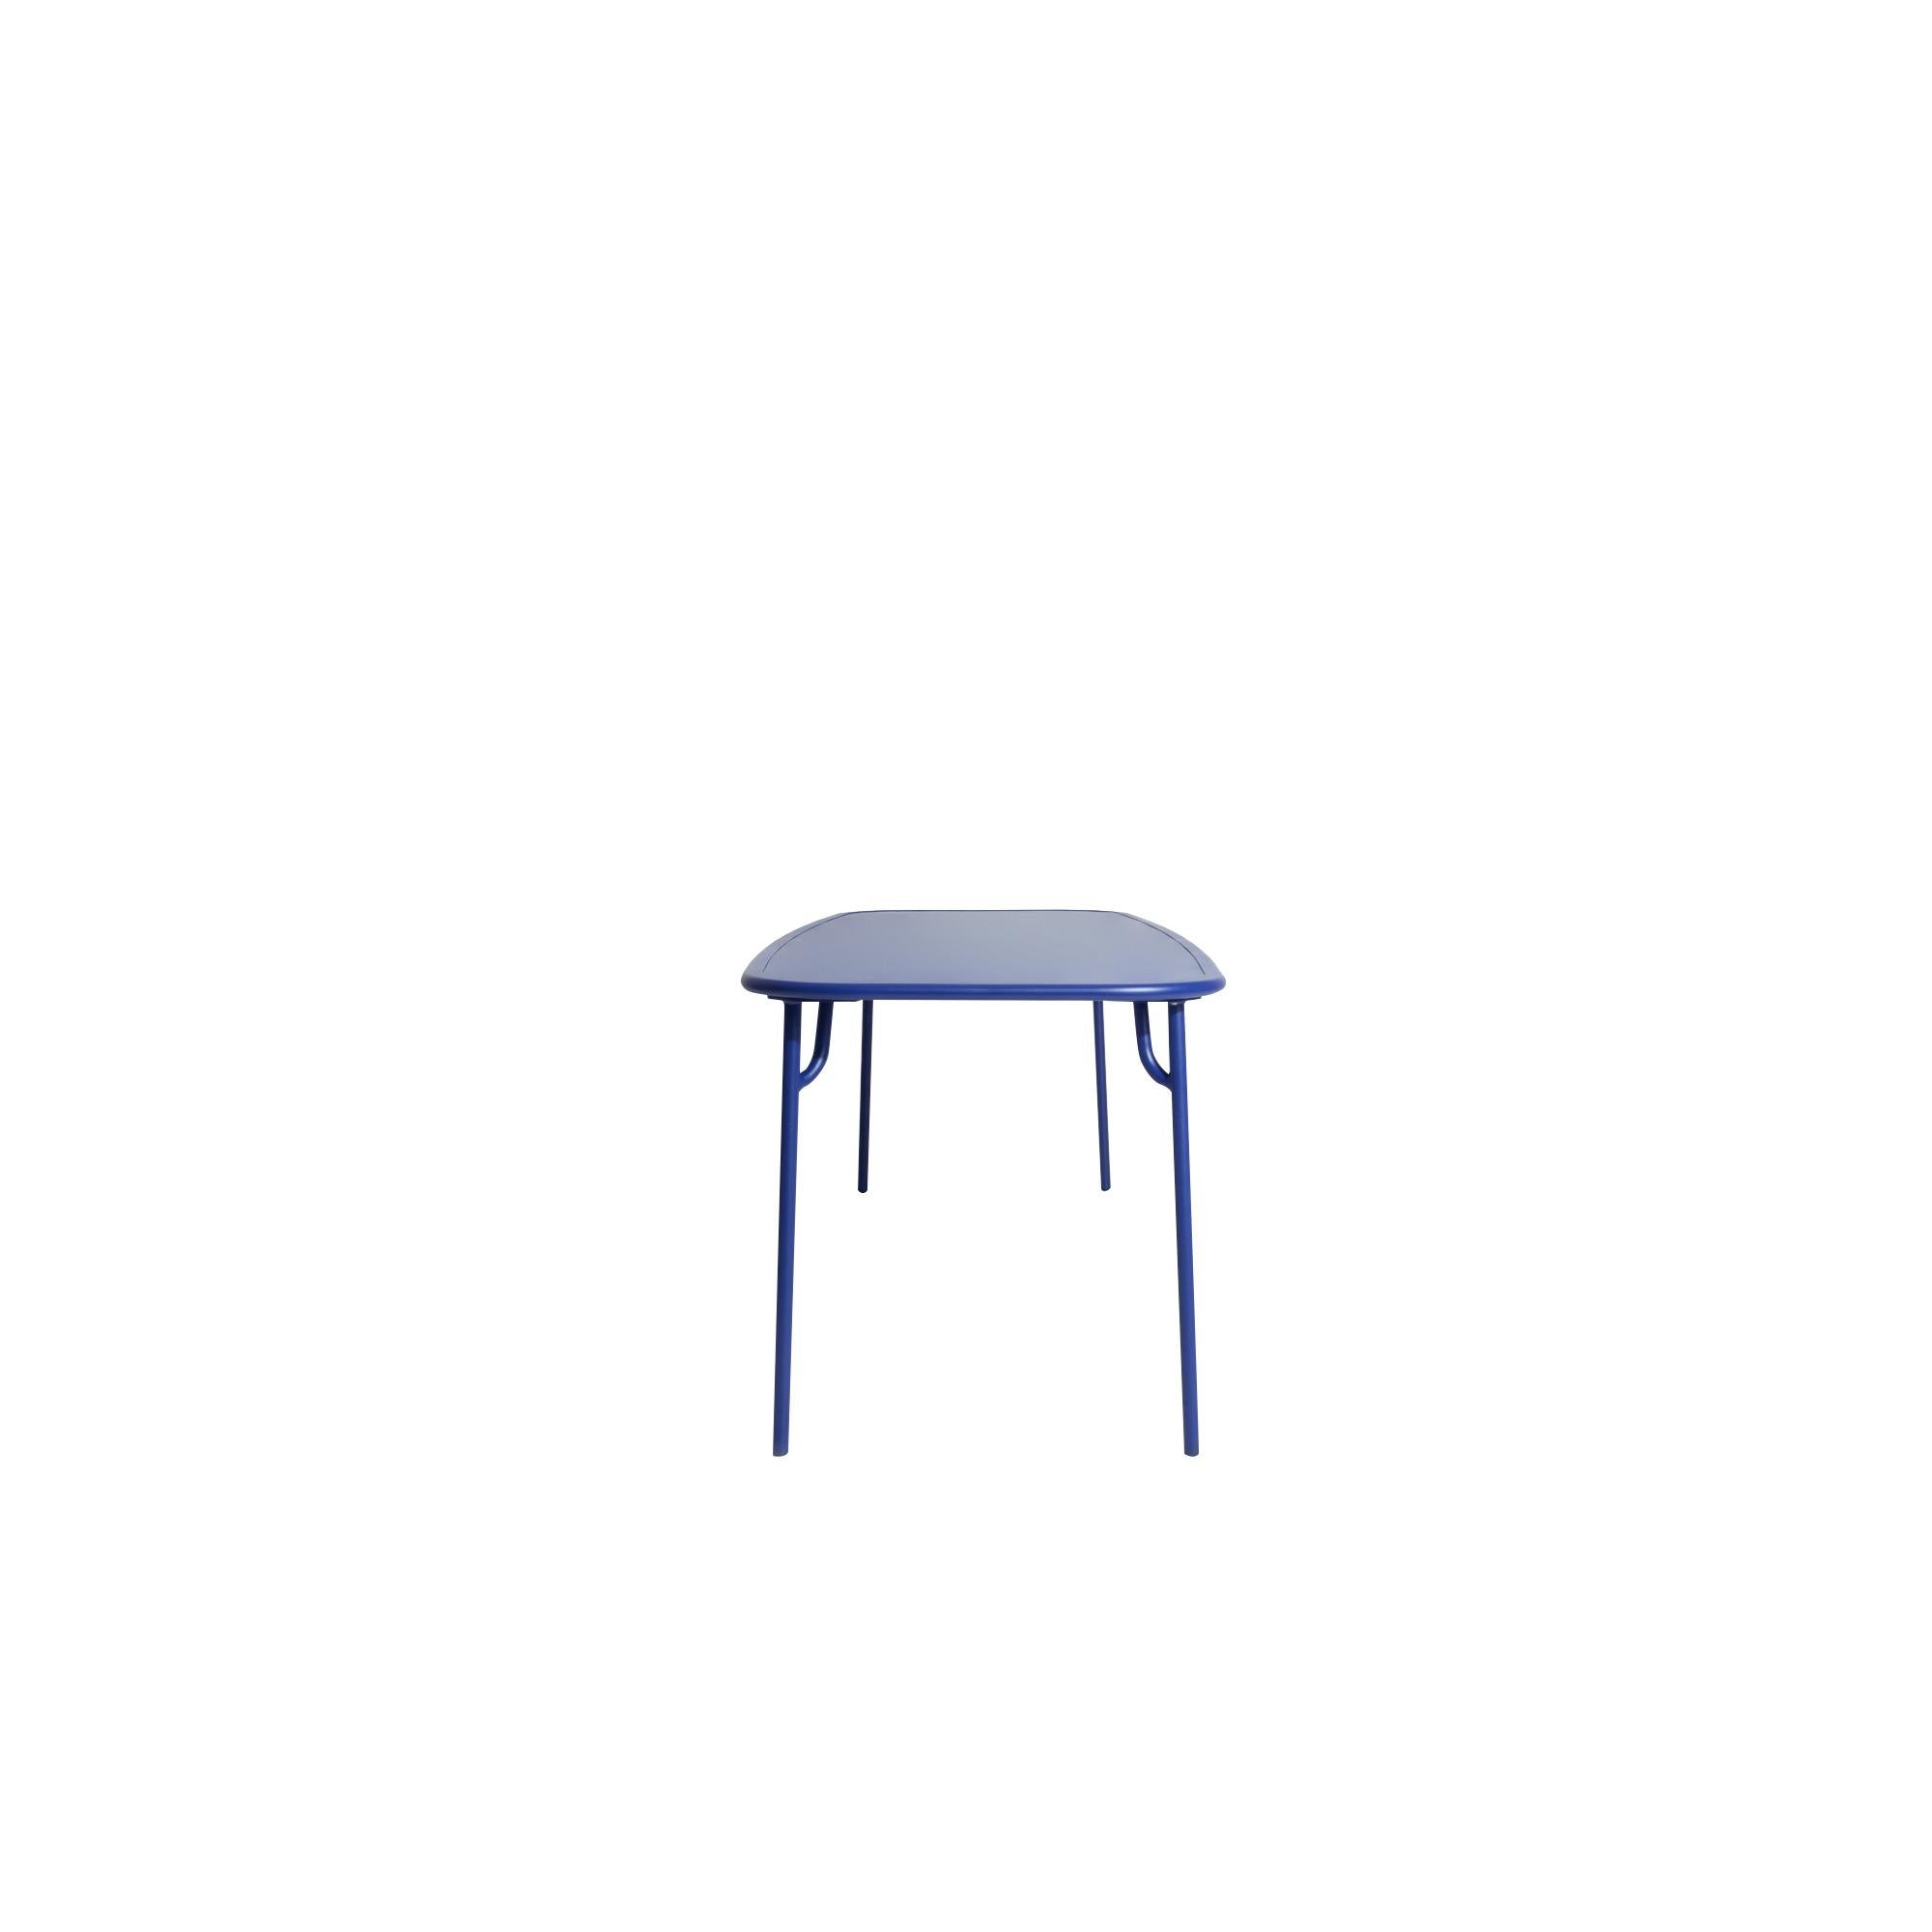 Chinese Petite Friture Week-End Large Plain Rectangular Dining Table in Blue Aluminium For Sale